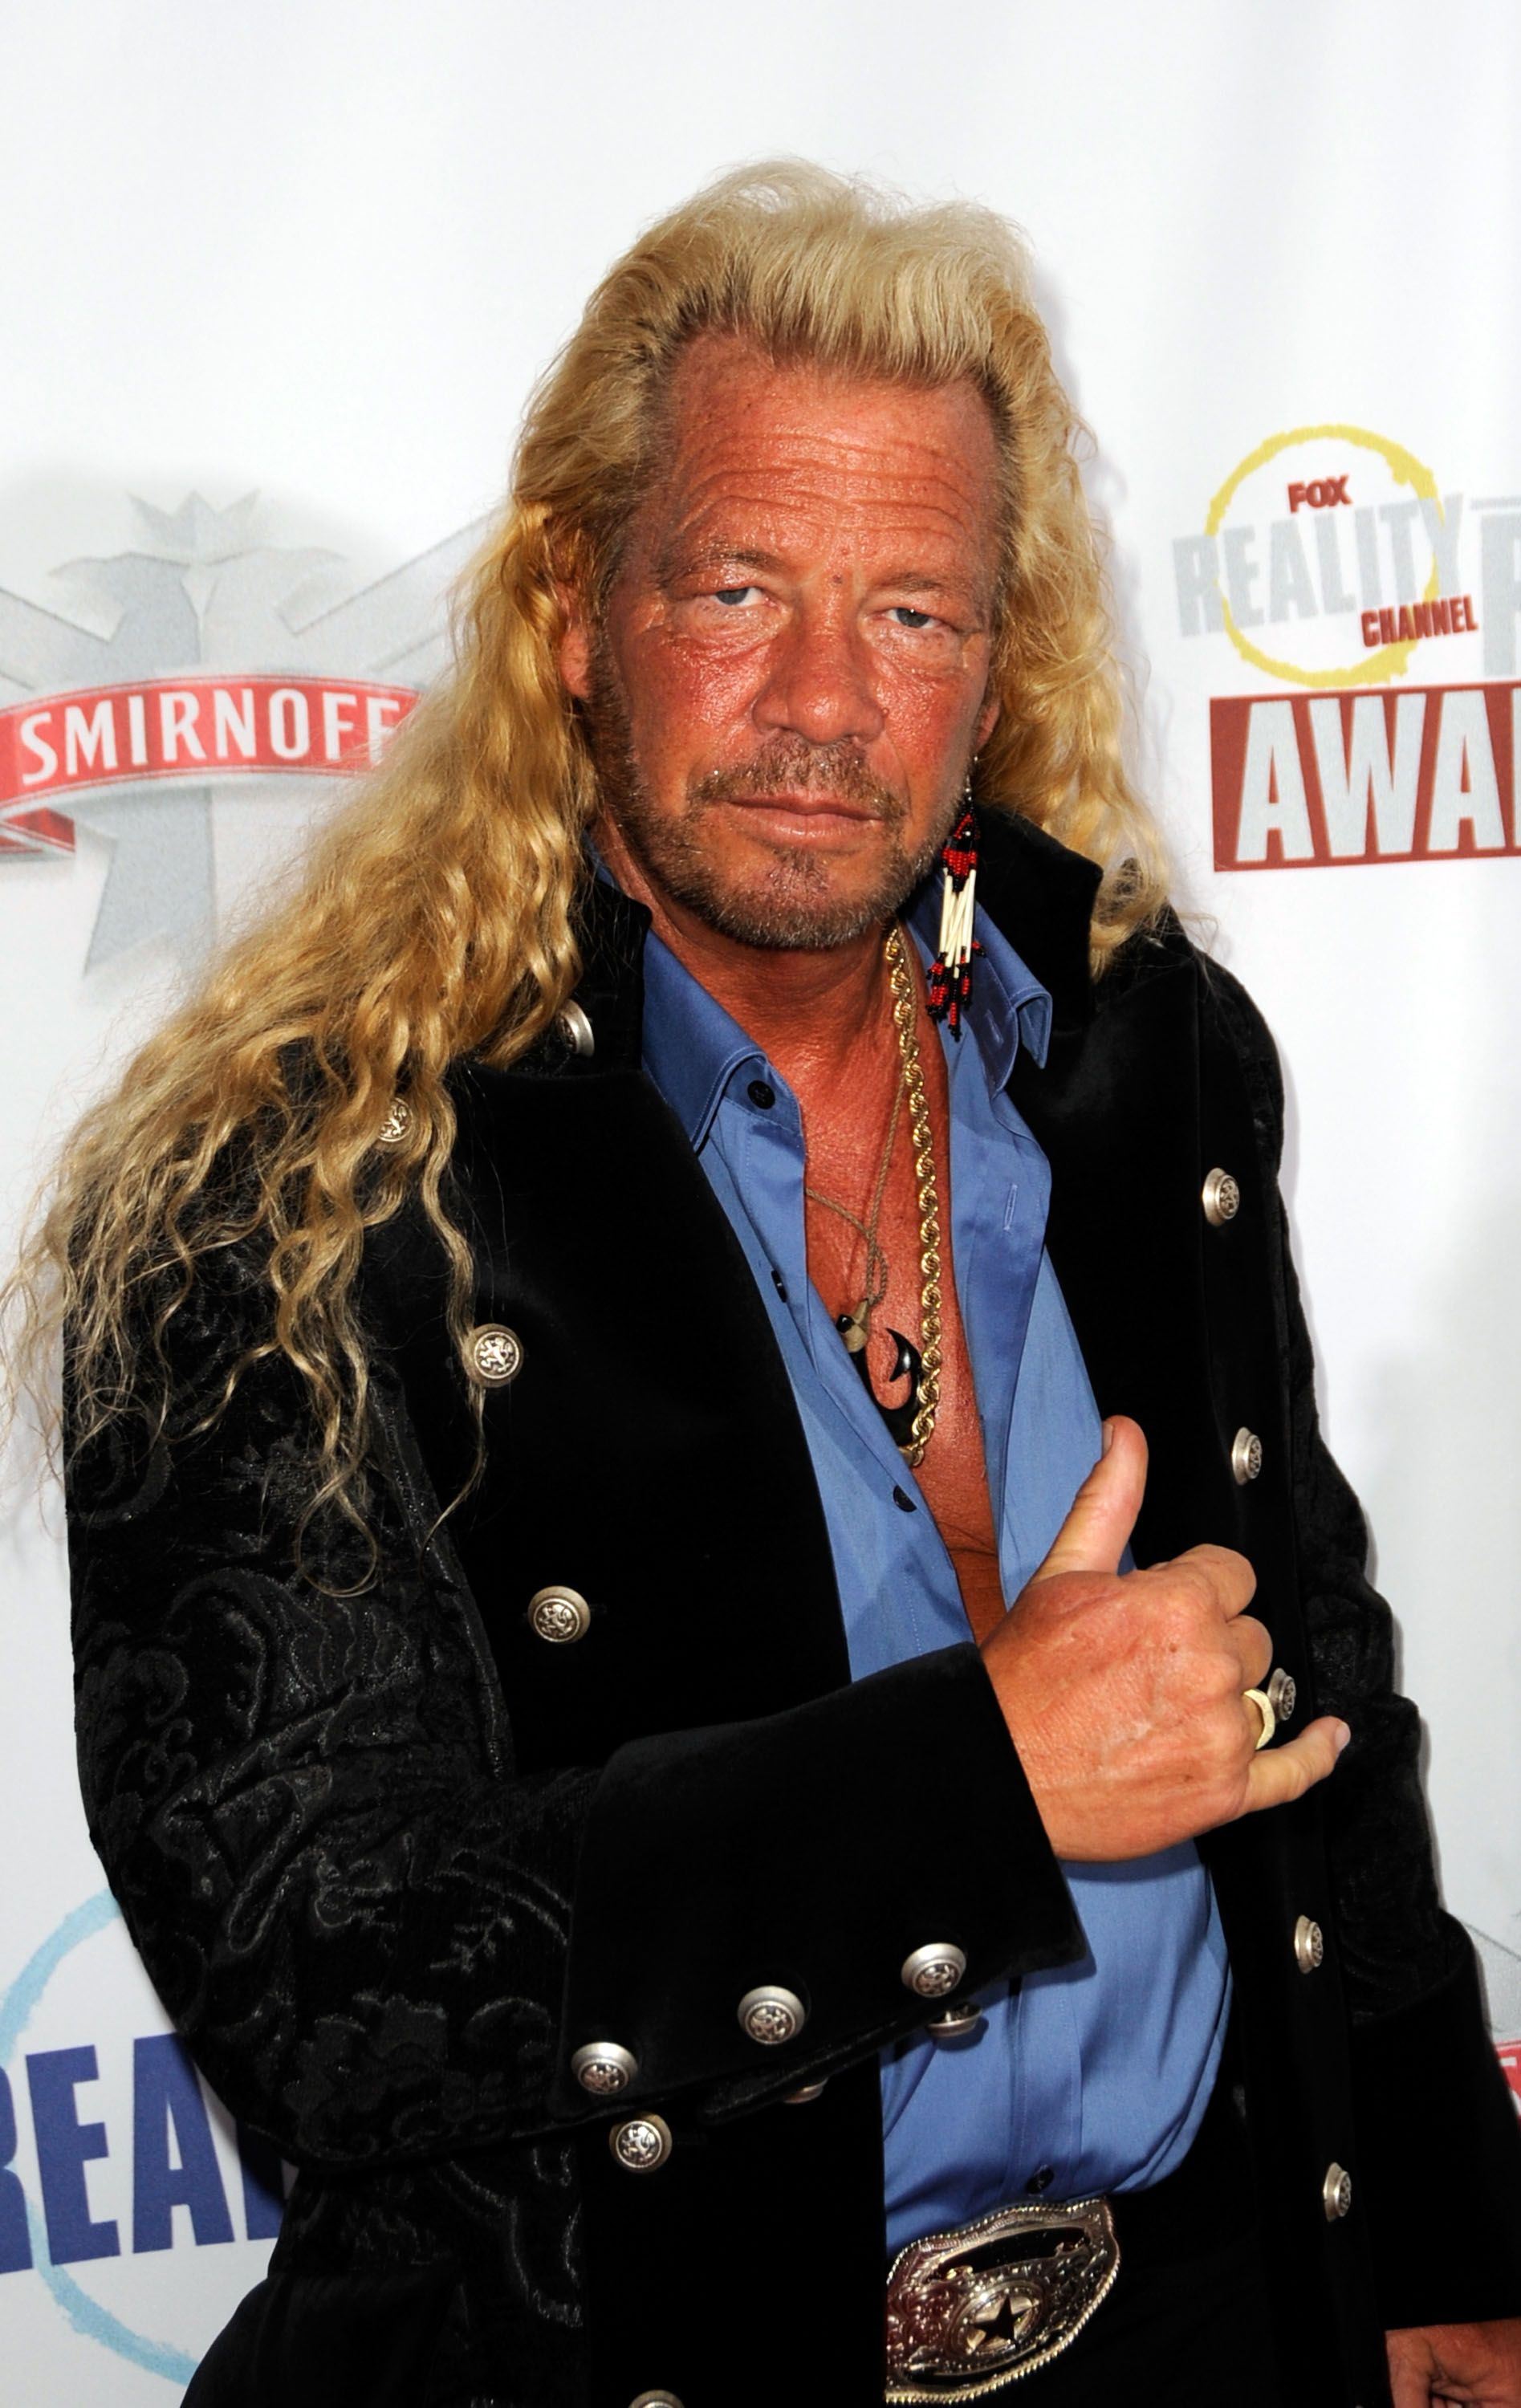 Duane "Dog" Chapman at the Fox Reality Channel Really Awards held at the Avalon Hollywood club on September 24, 2008, in California | Photo: Frazer Harrison/Getty Images